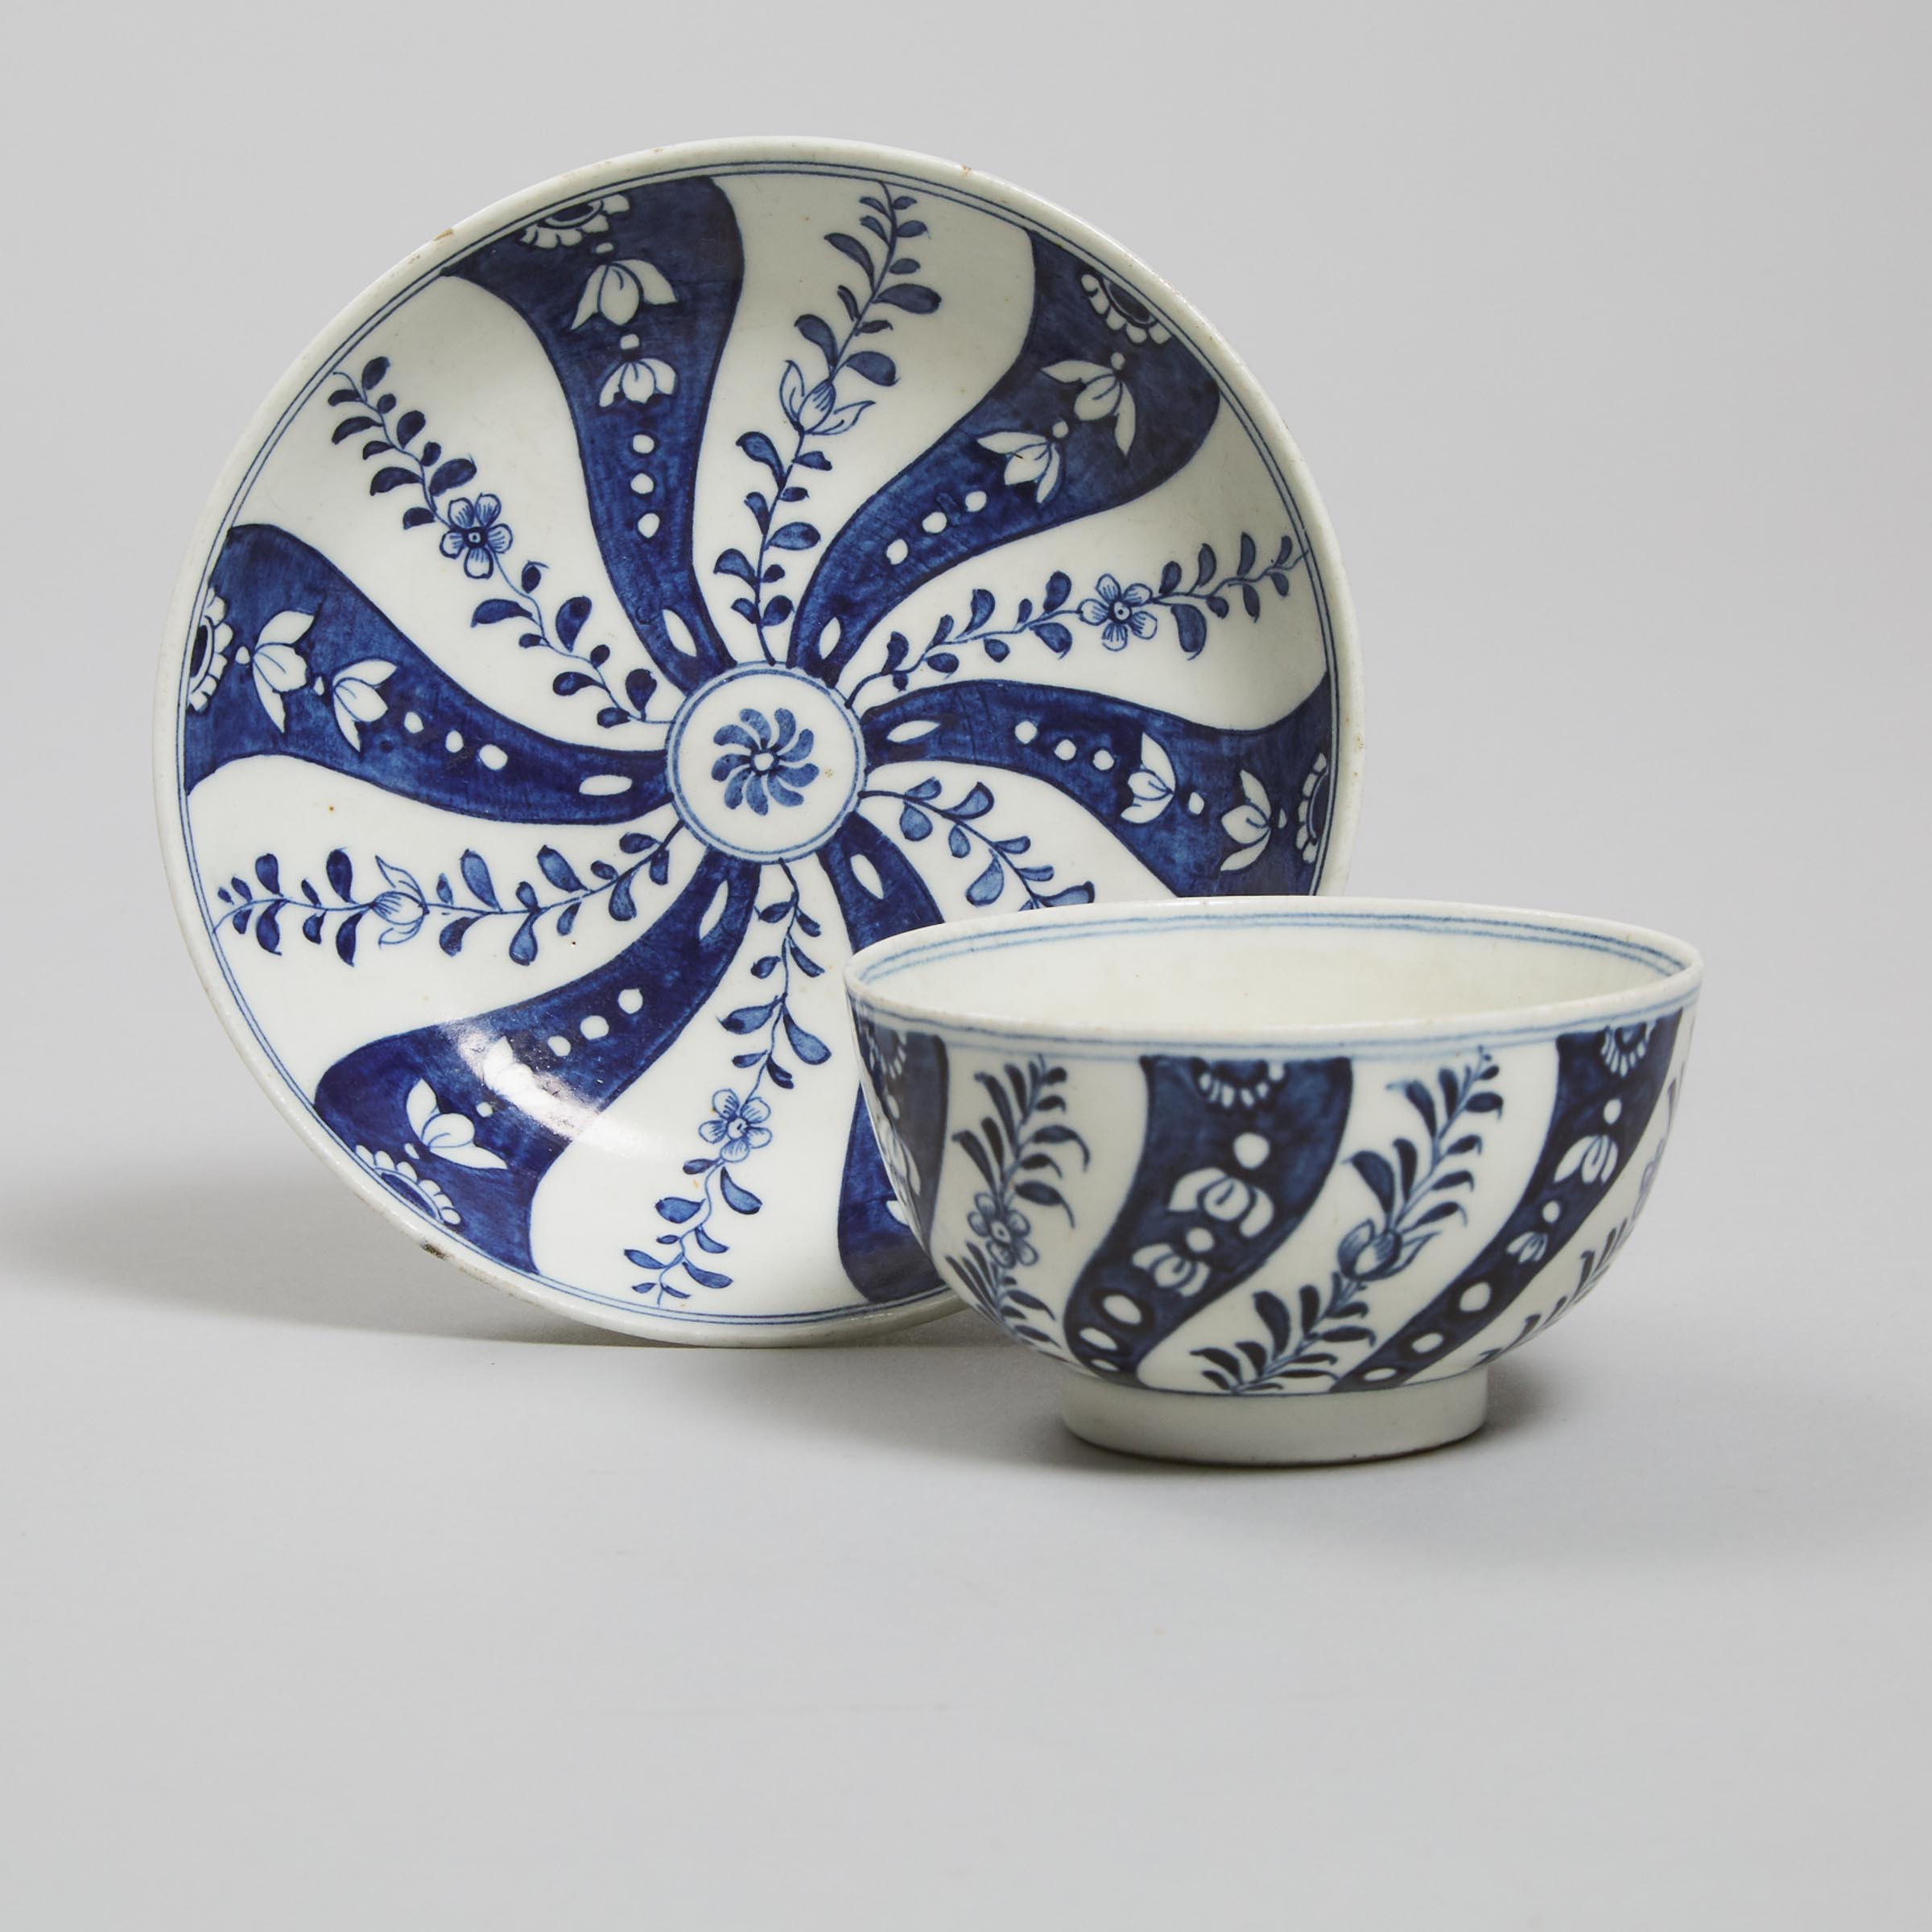 Lowestoft Blue and White Spiral Panels Tea Bowl and Saucer, c.1775-80